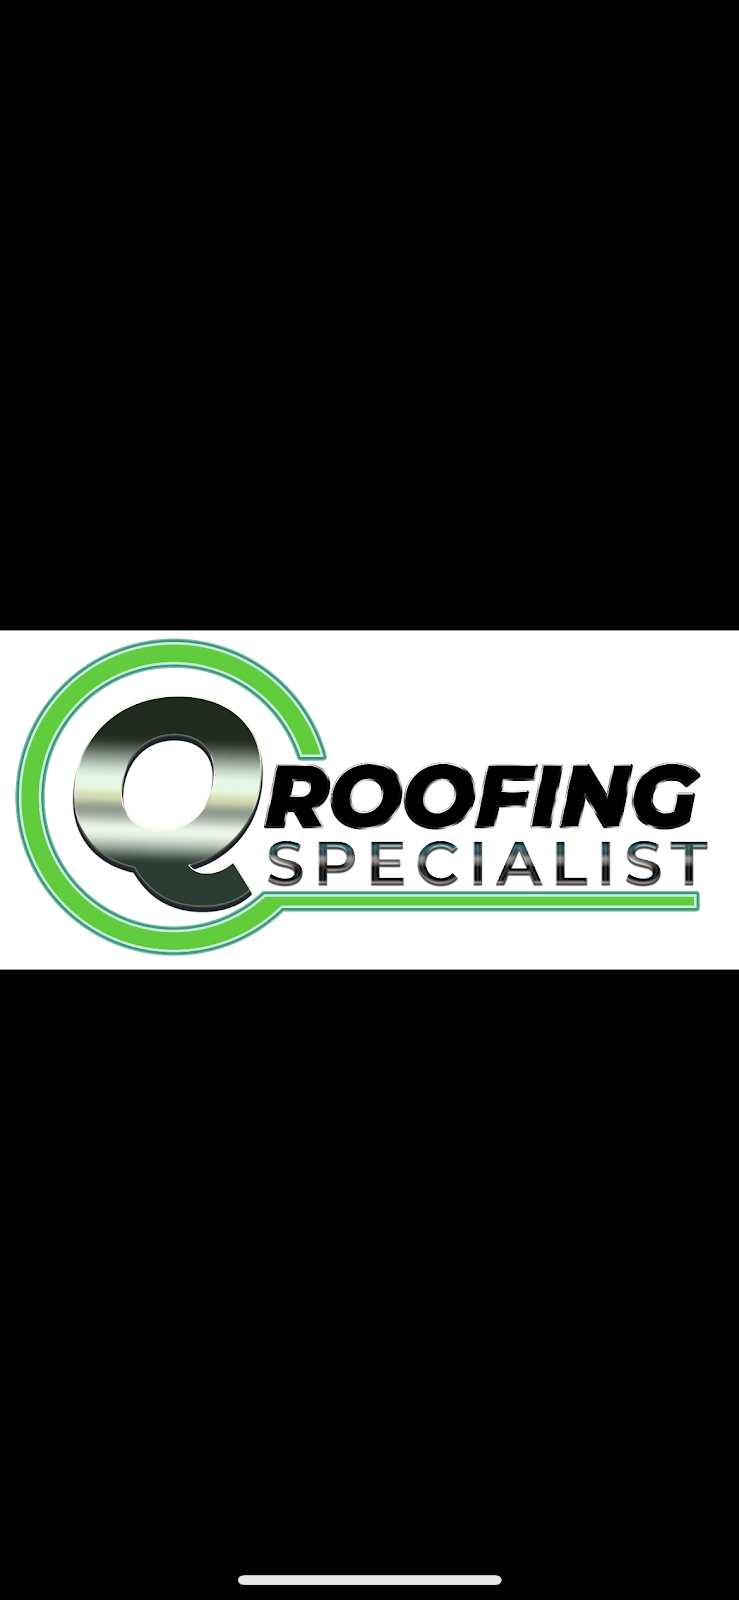 Q Roofing Specialist | 202 Mason Ave, Waterbury, CT 06708 | Phone: (203) 600-4980